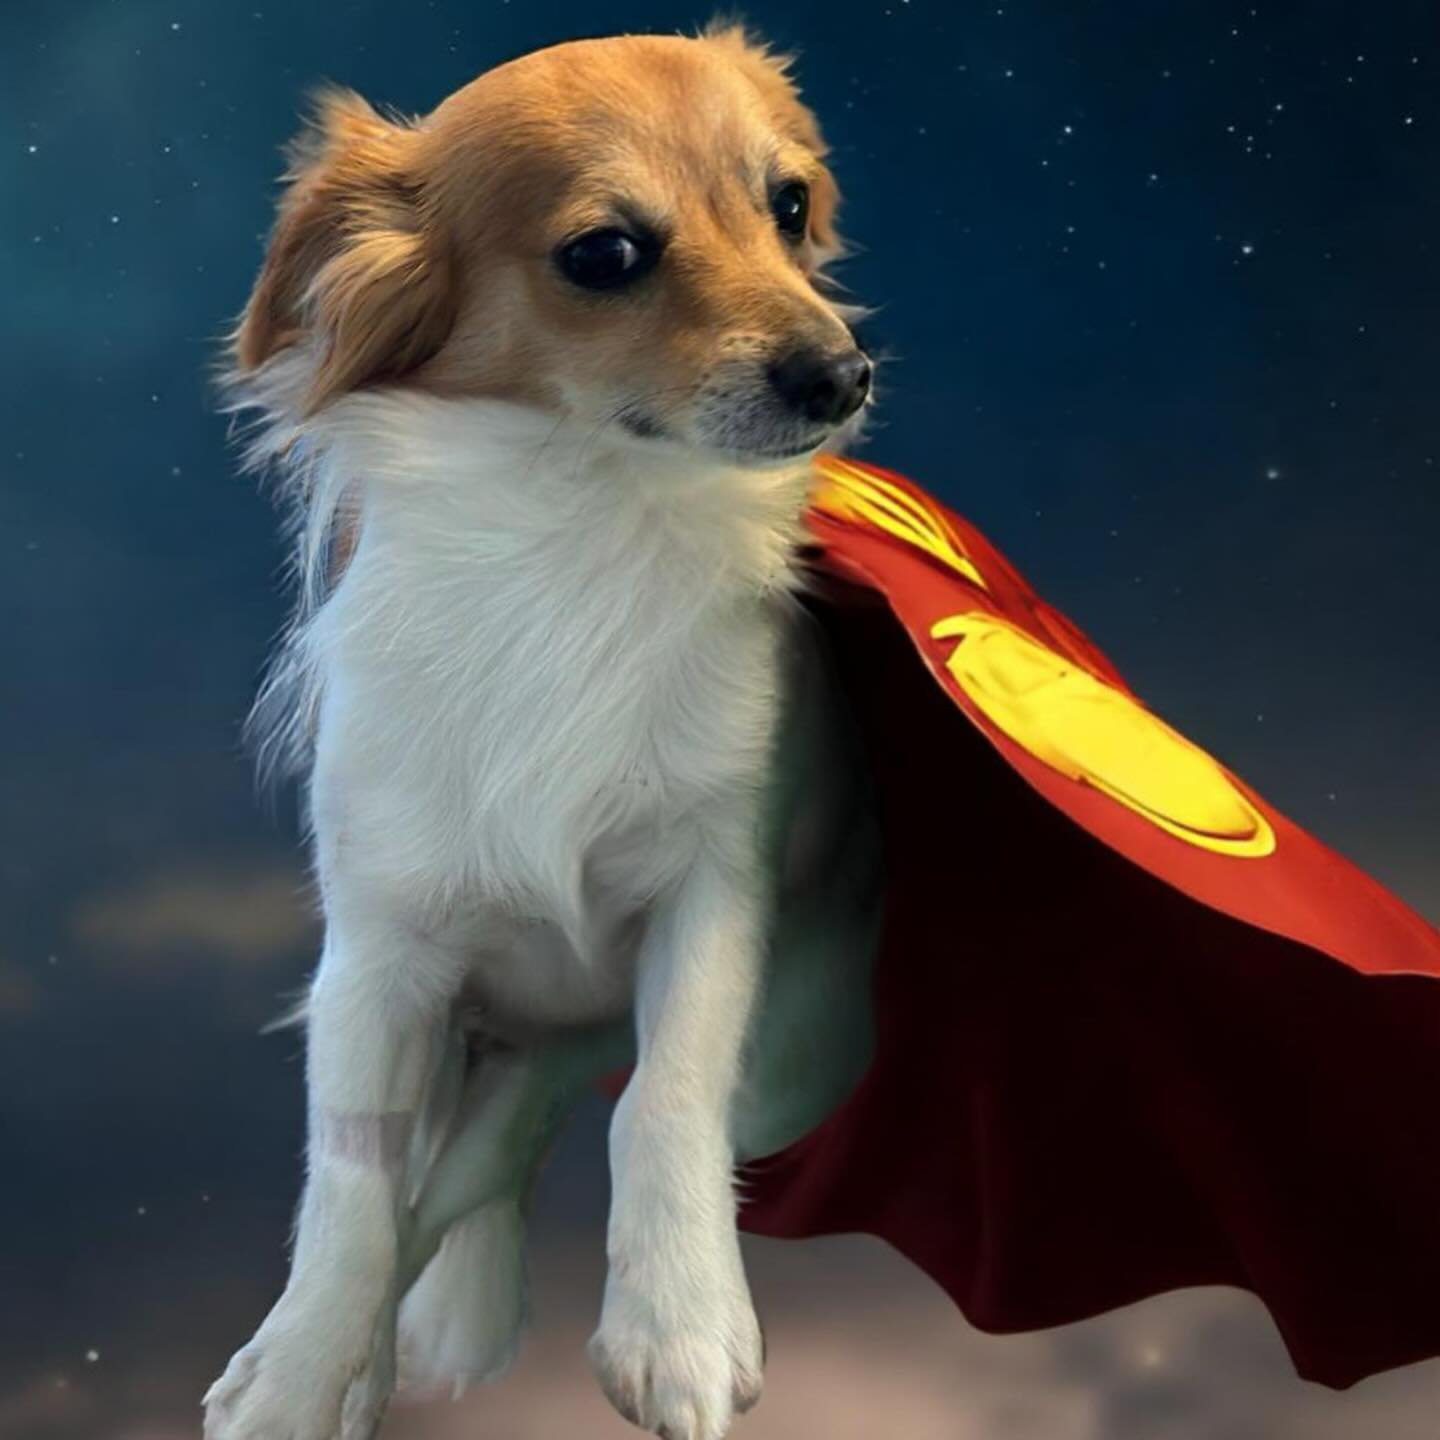 It&rsquo;s a bird, it&rsquo;s a plane, it&rsquo;s Super Eli! Eli | male | 8 months old | neutered | Chihuahua mix | available for flat adoption fee of $150!